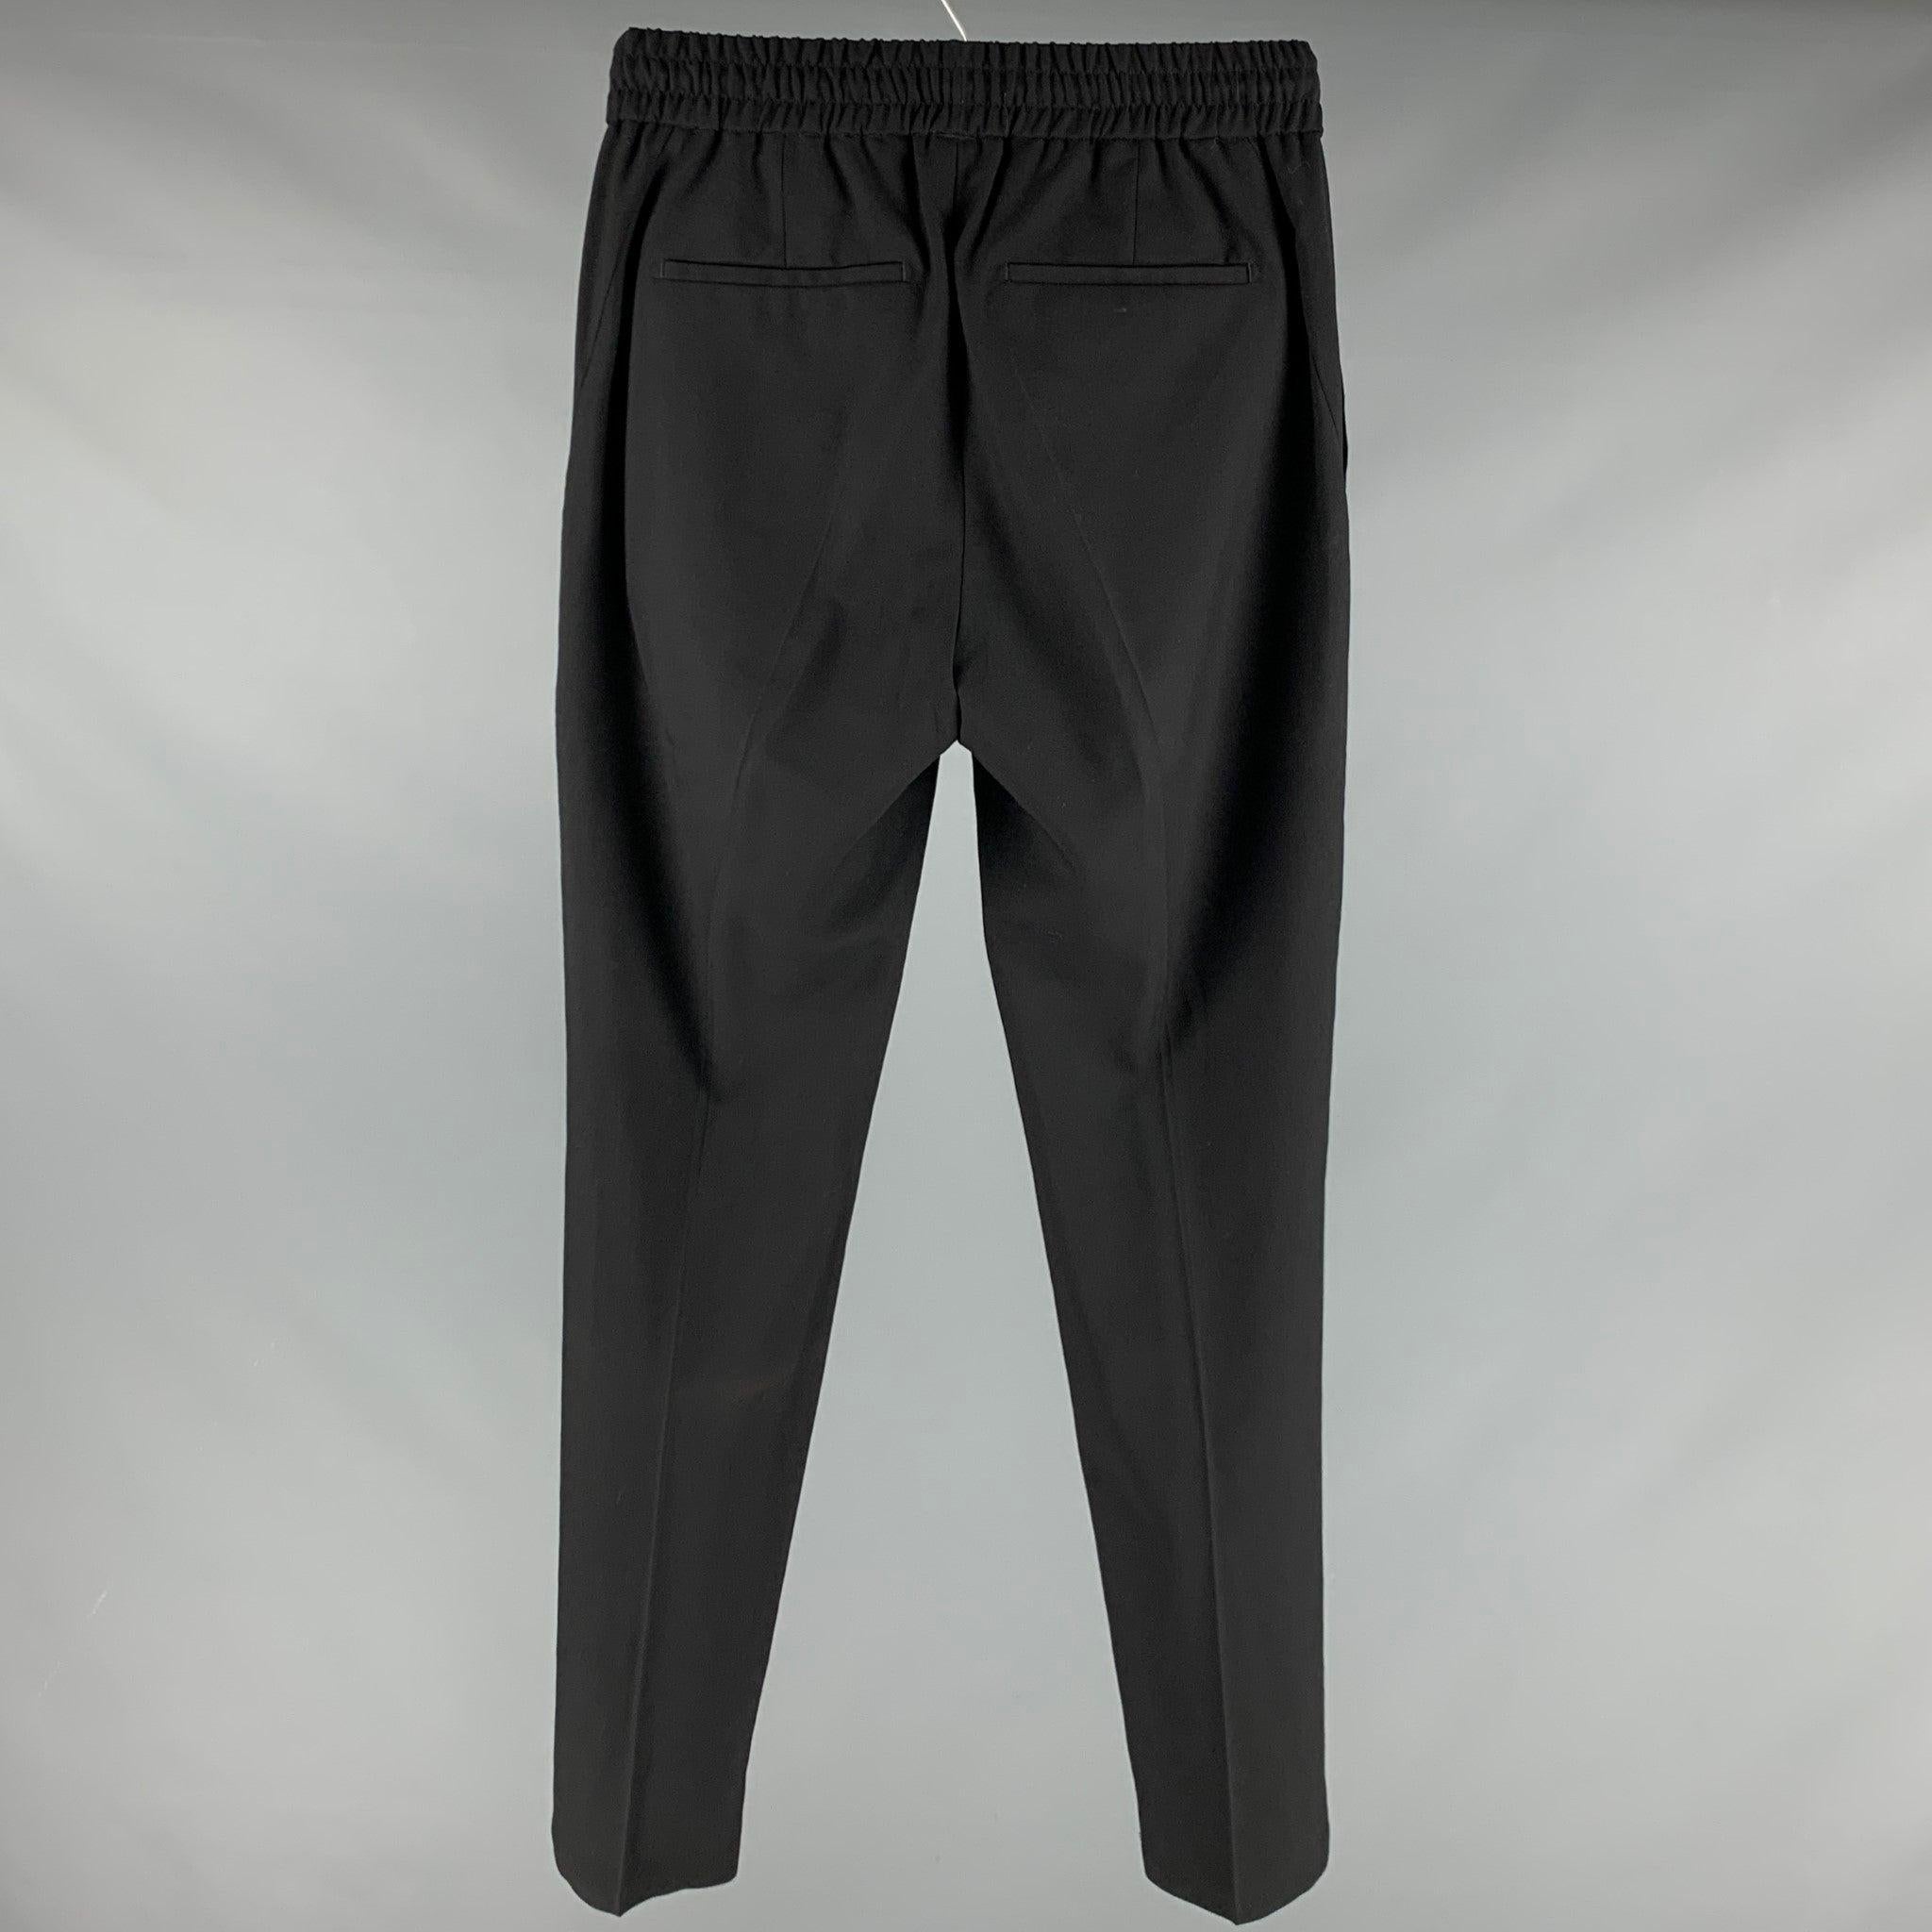 GIVENCHY casual pants
in a black wool fabric featuring elastic waistband, four pockets, and a zip fly closure. Made in Bulgaria.Very Good Pre-Owned Condition. Minor signs of wear. 

Marked:   46 

Measurements: 
  Waist: 30 inches Rise: 10 inches